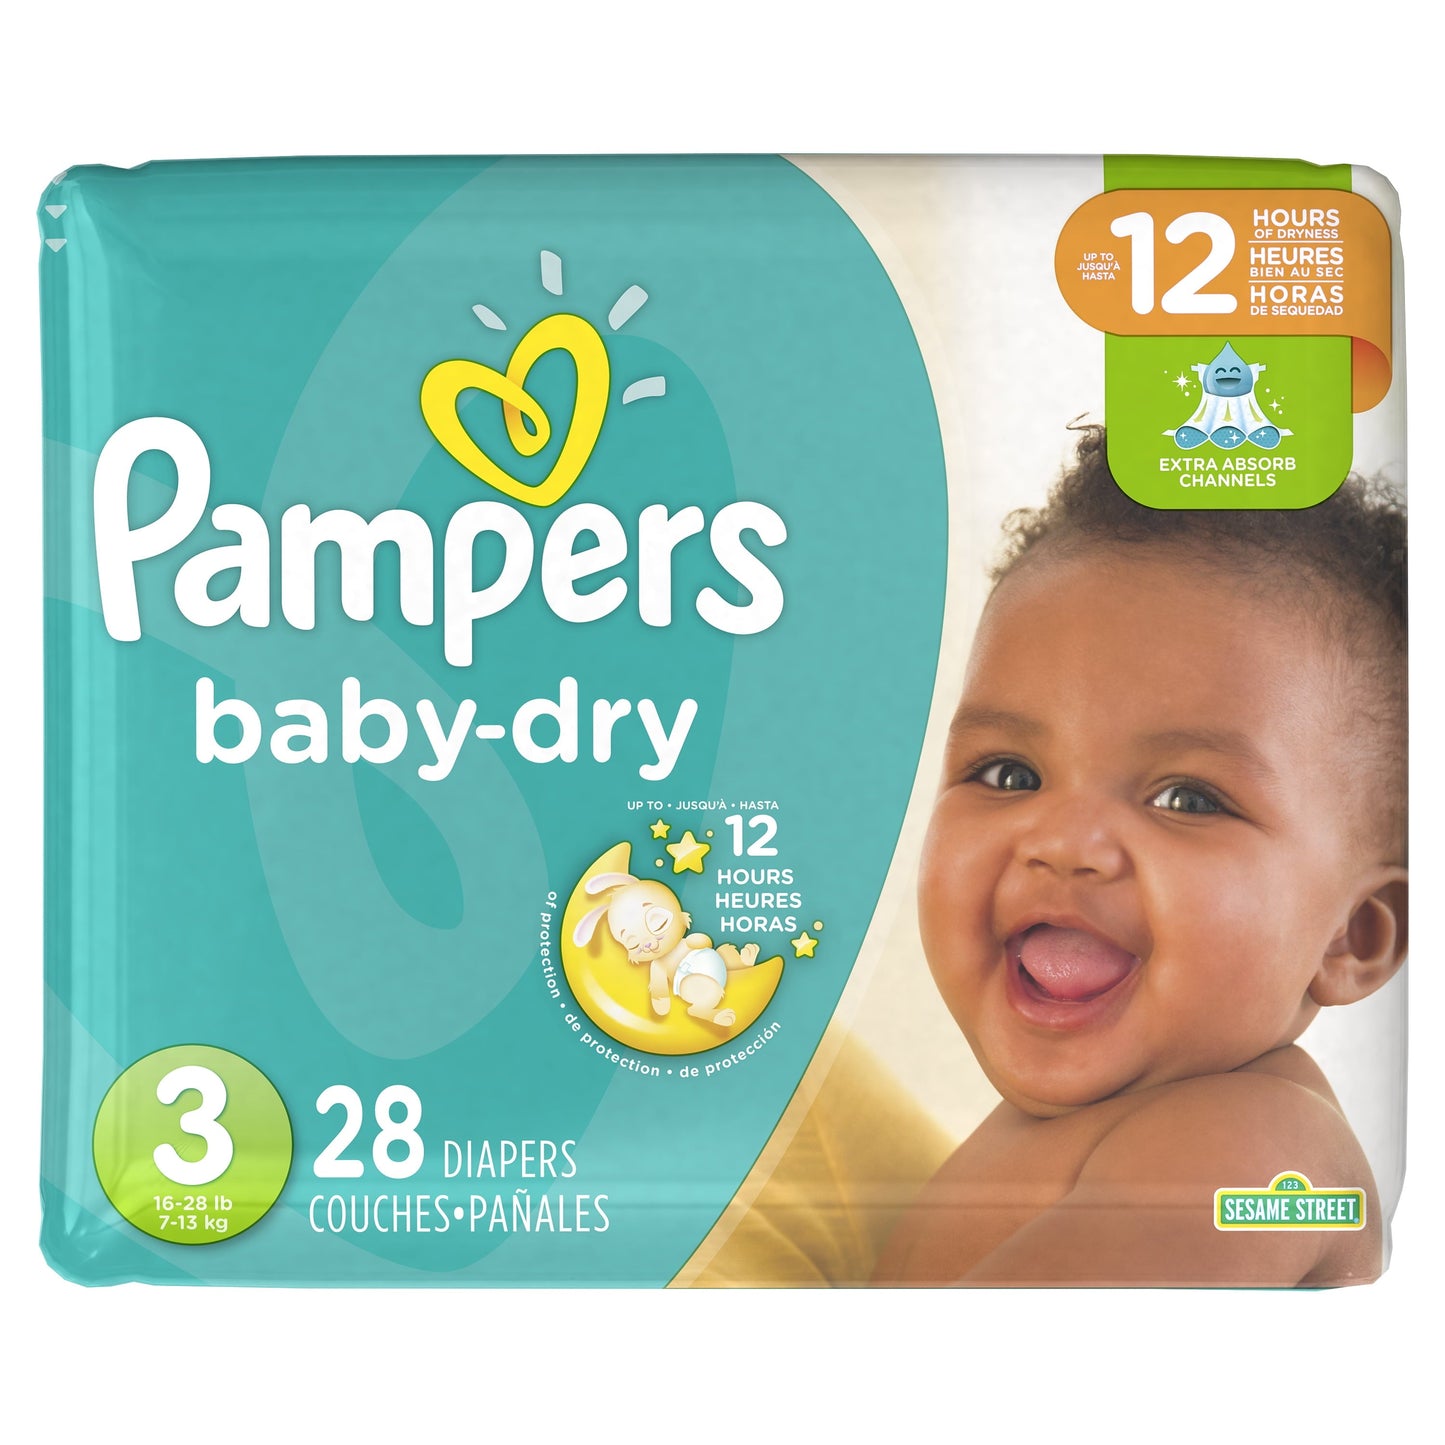 Pampers Baby-Dry Diapers, Size 3, 28 Count